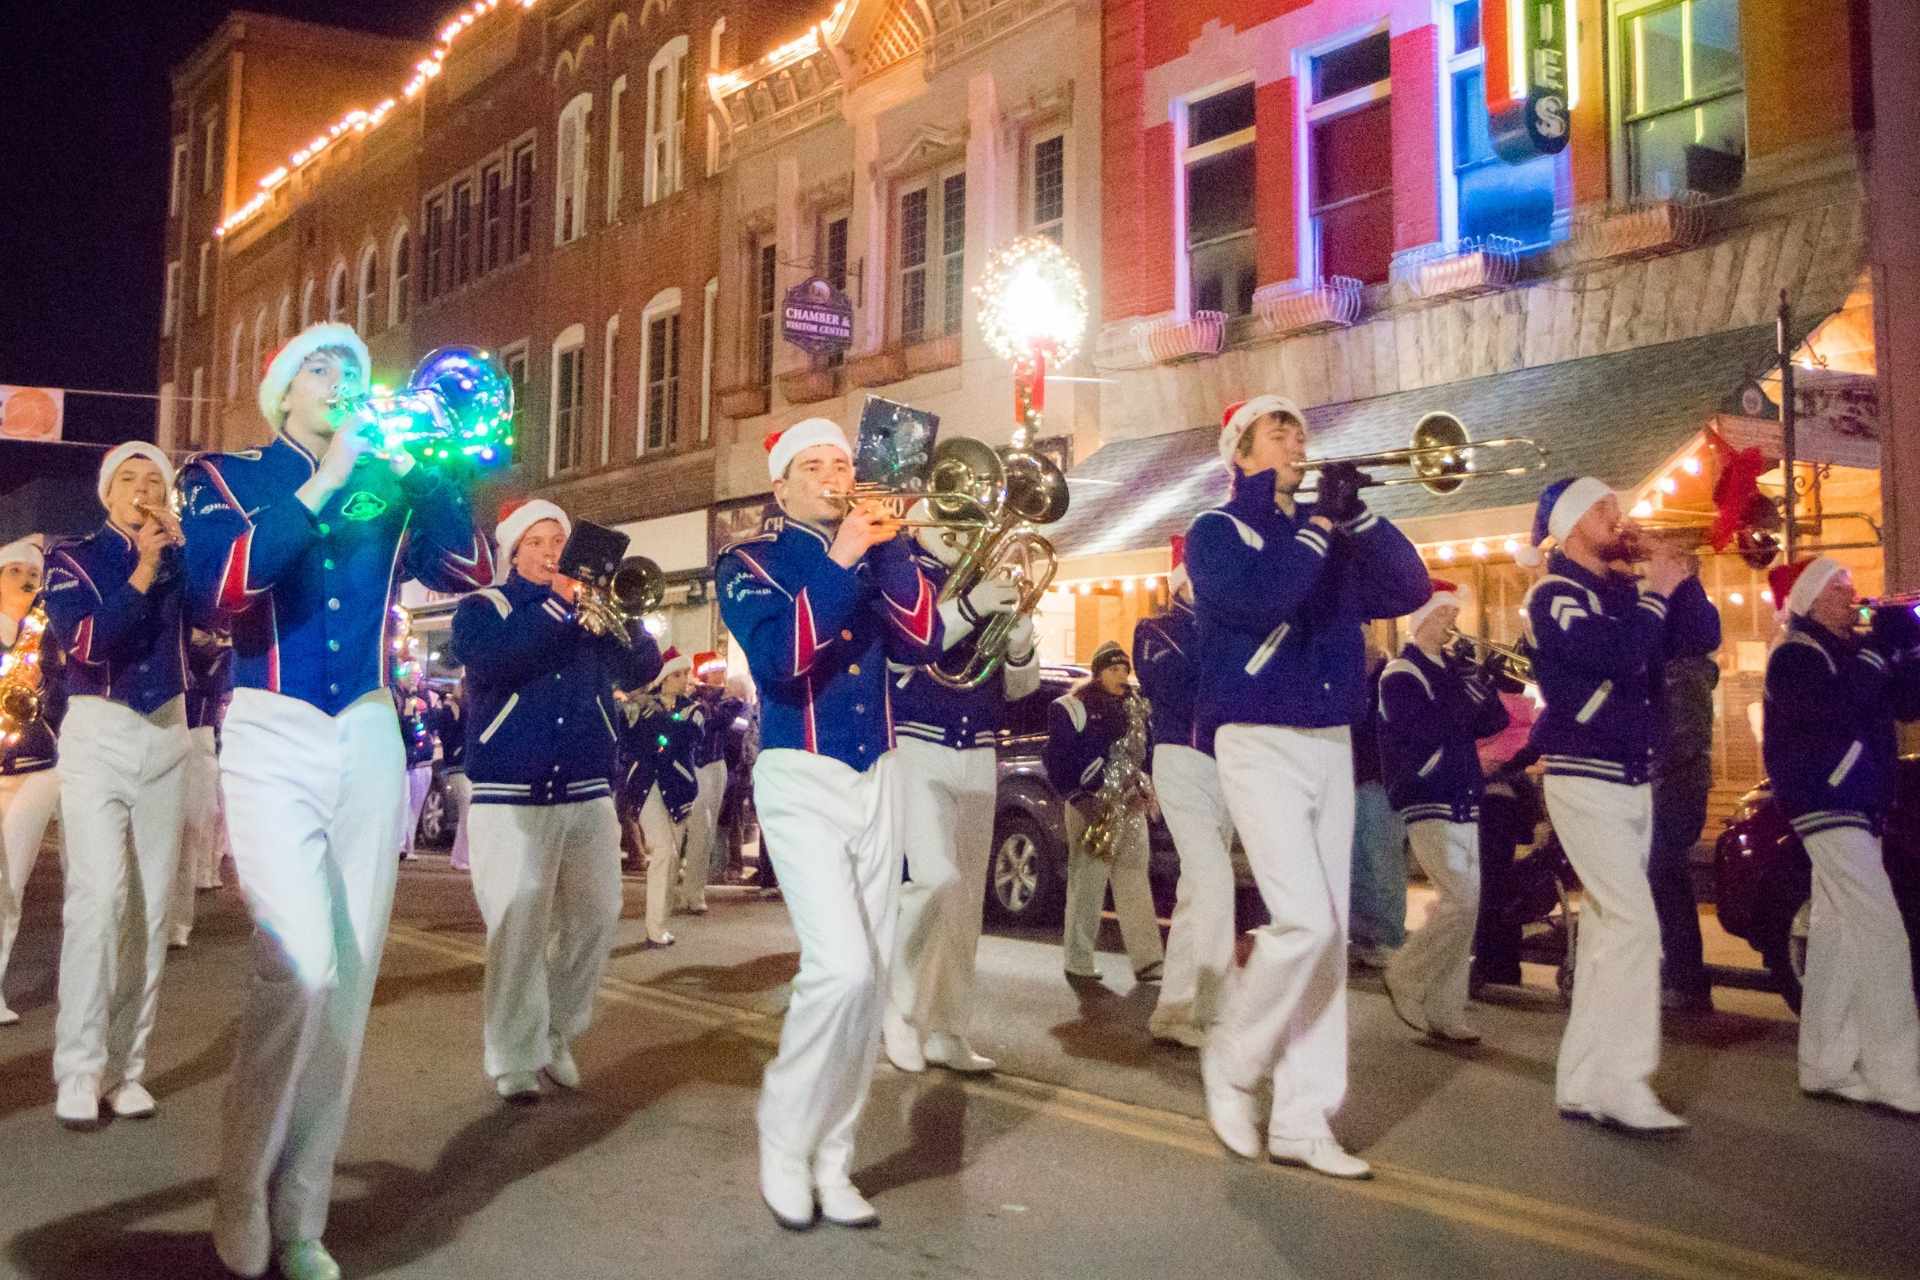 File photo from a previous Christmas parade on Main Street in Buckhannon.